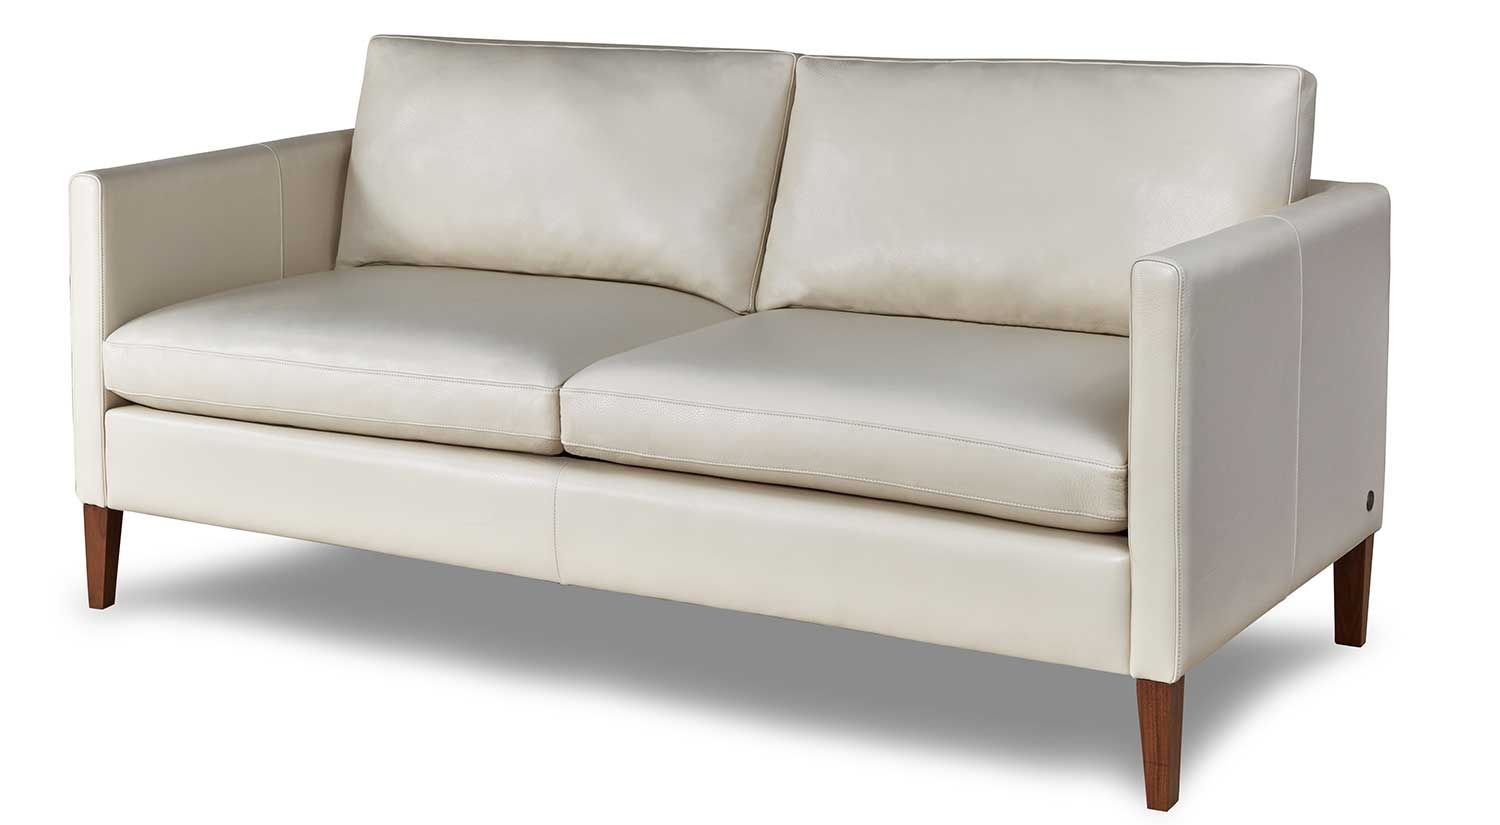 Circle Furniture – Milo Sofa | Small Sofas | Leather Couches With Regard To Milo Sofa Chairs (View 1 of 20)